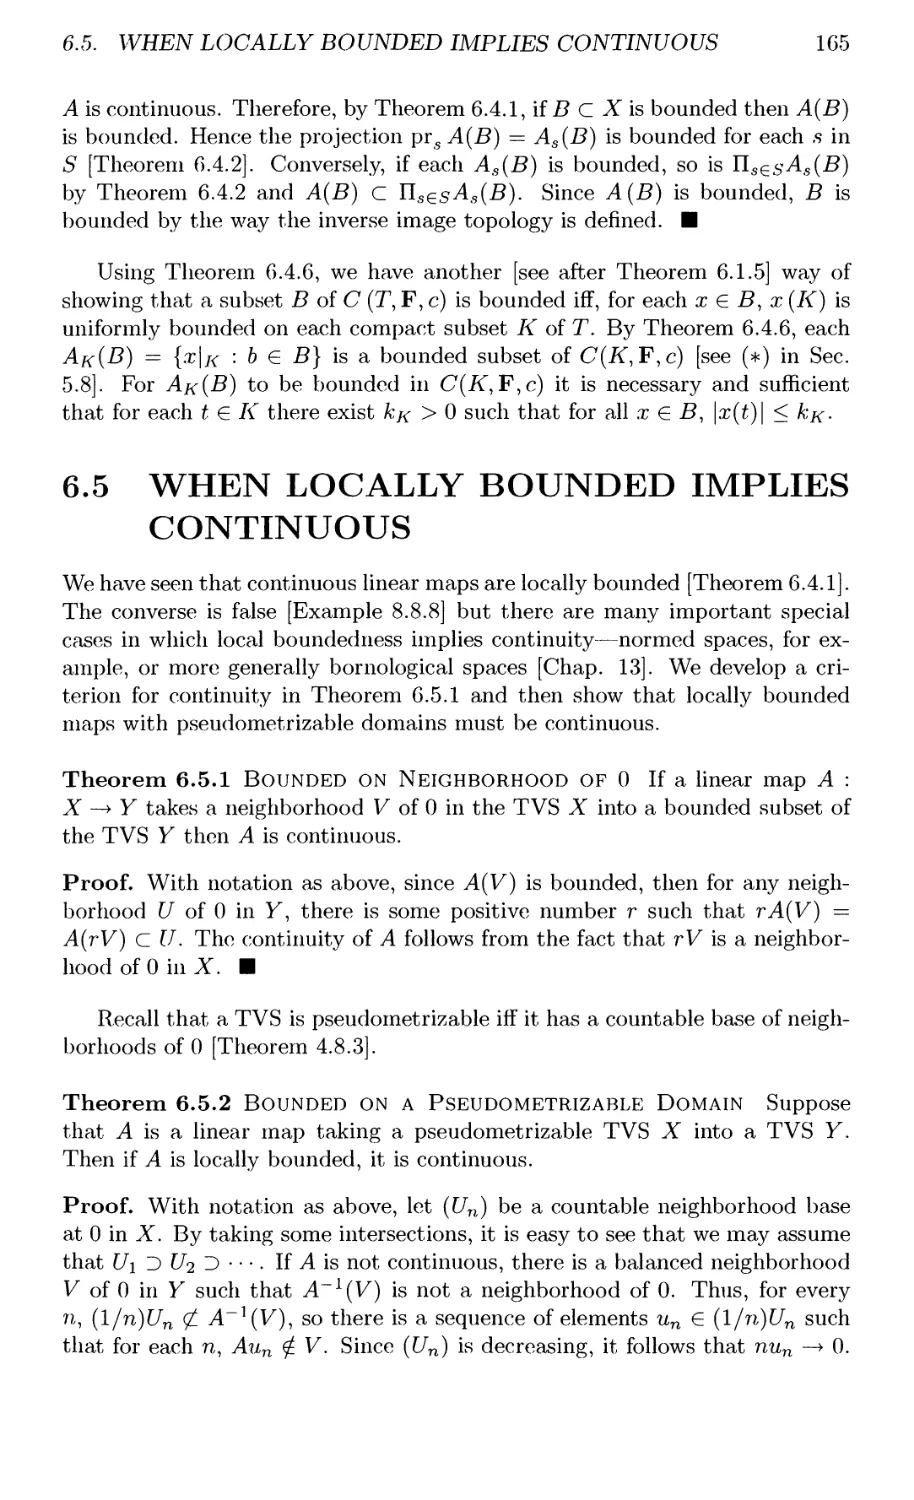 6.5 WHEN LOCALLY BOUNDED IMPLIES CONTINUOUS